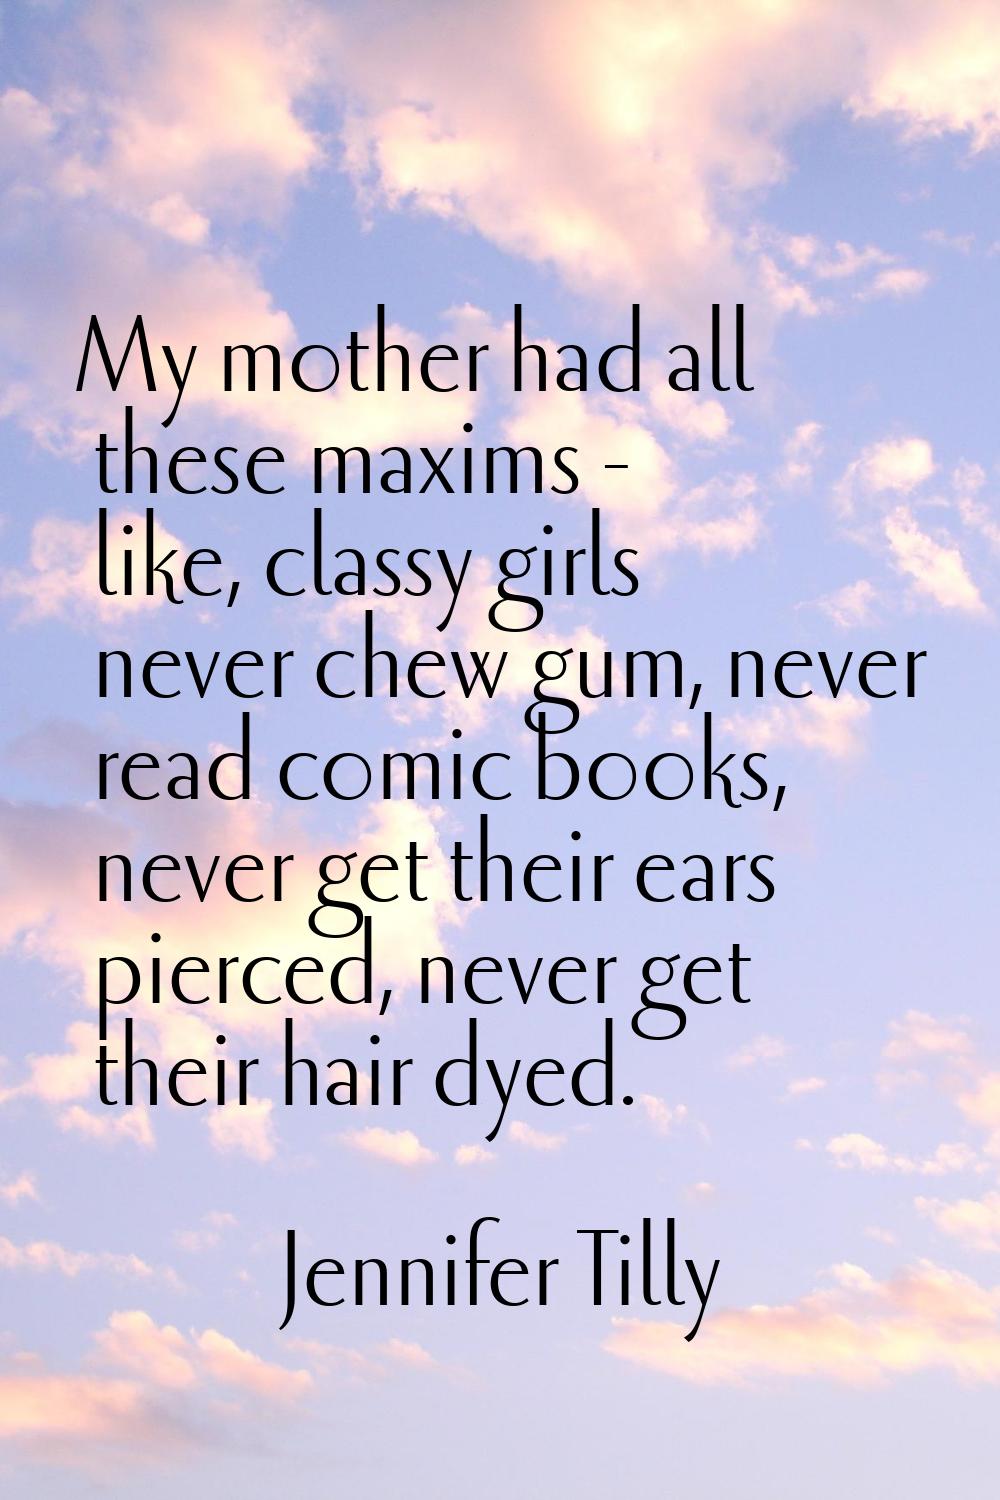 My mother had all these maxims - like, classy girls never chew gum, never read comic books, never g